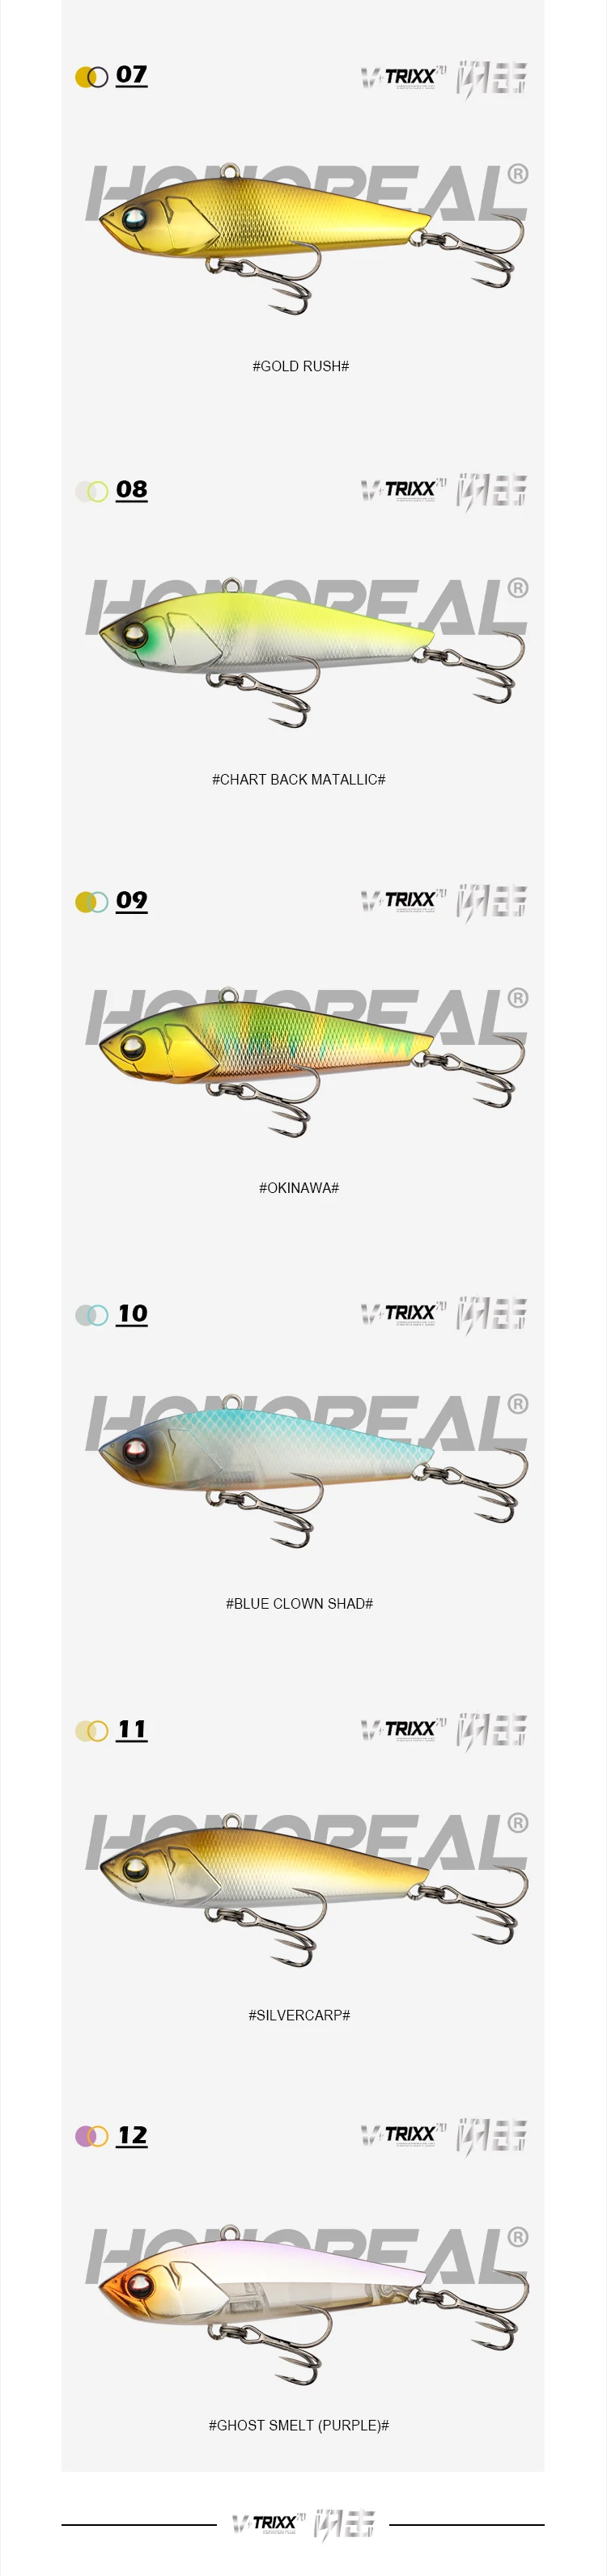 HONOREAL VFT 70mm 11.5g sinking lure